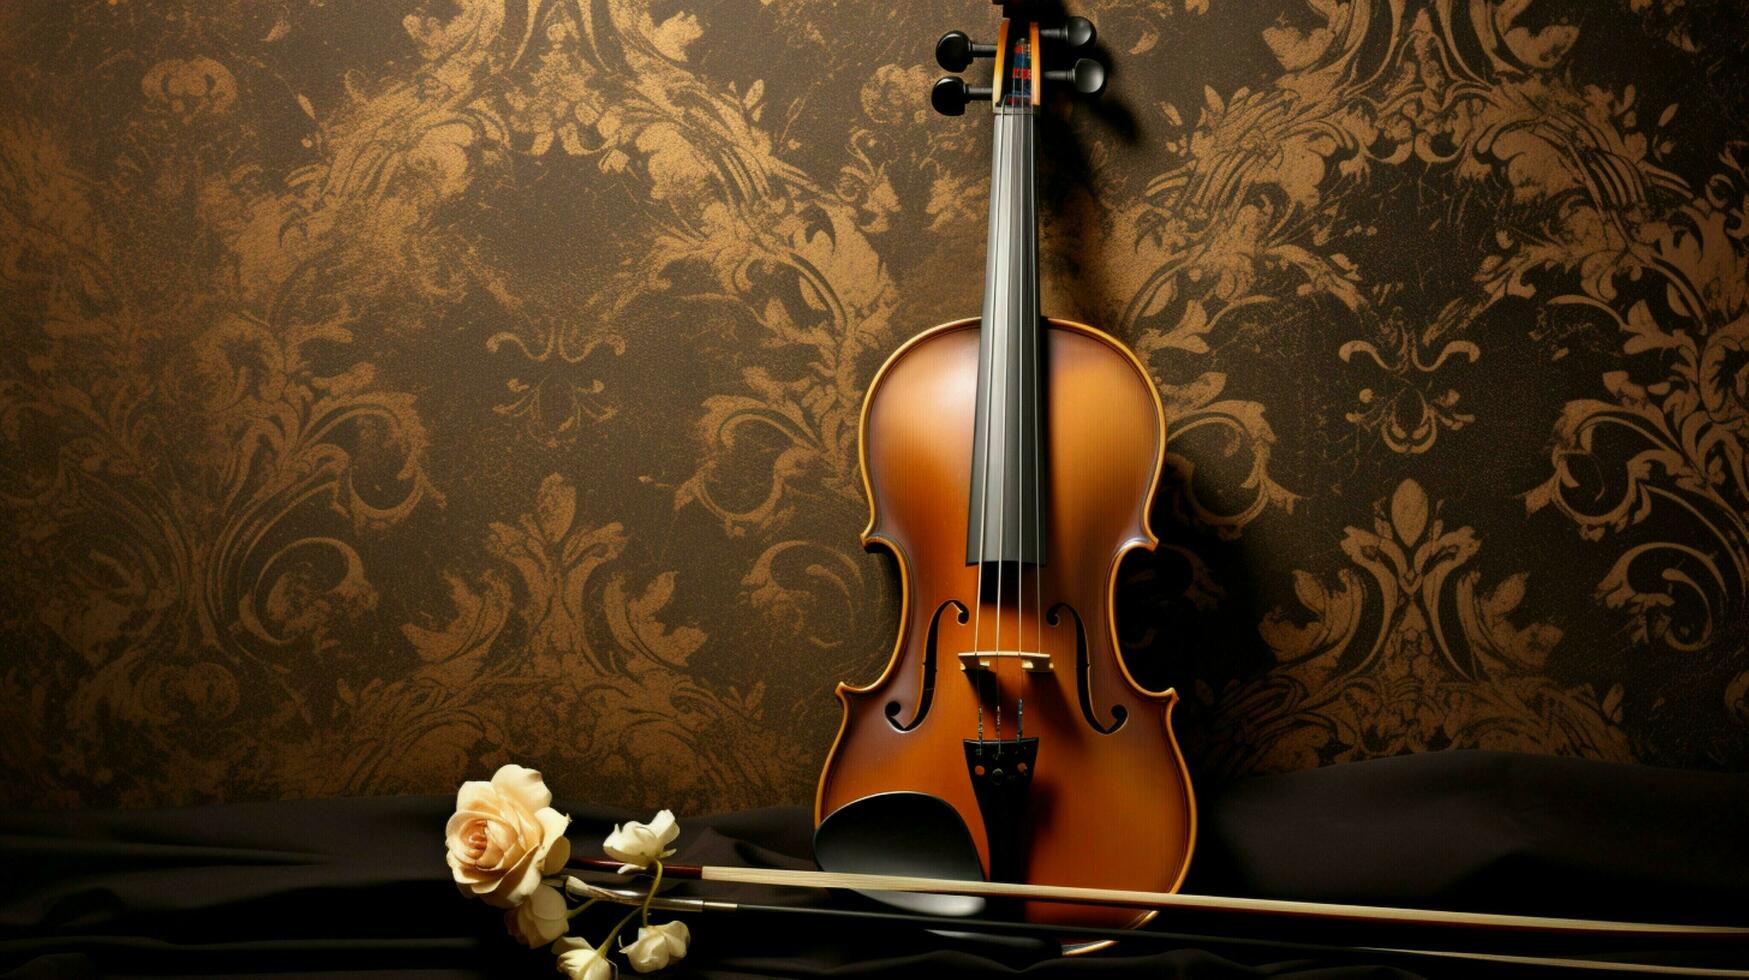 classical elegance violin on abstract ornate backdrop photo